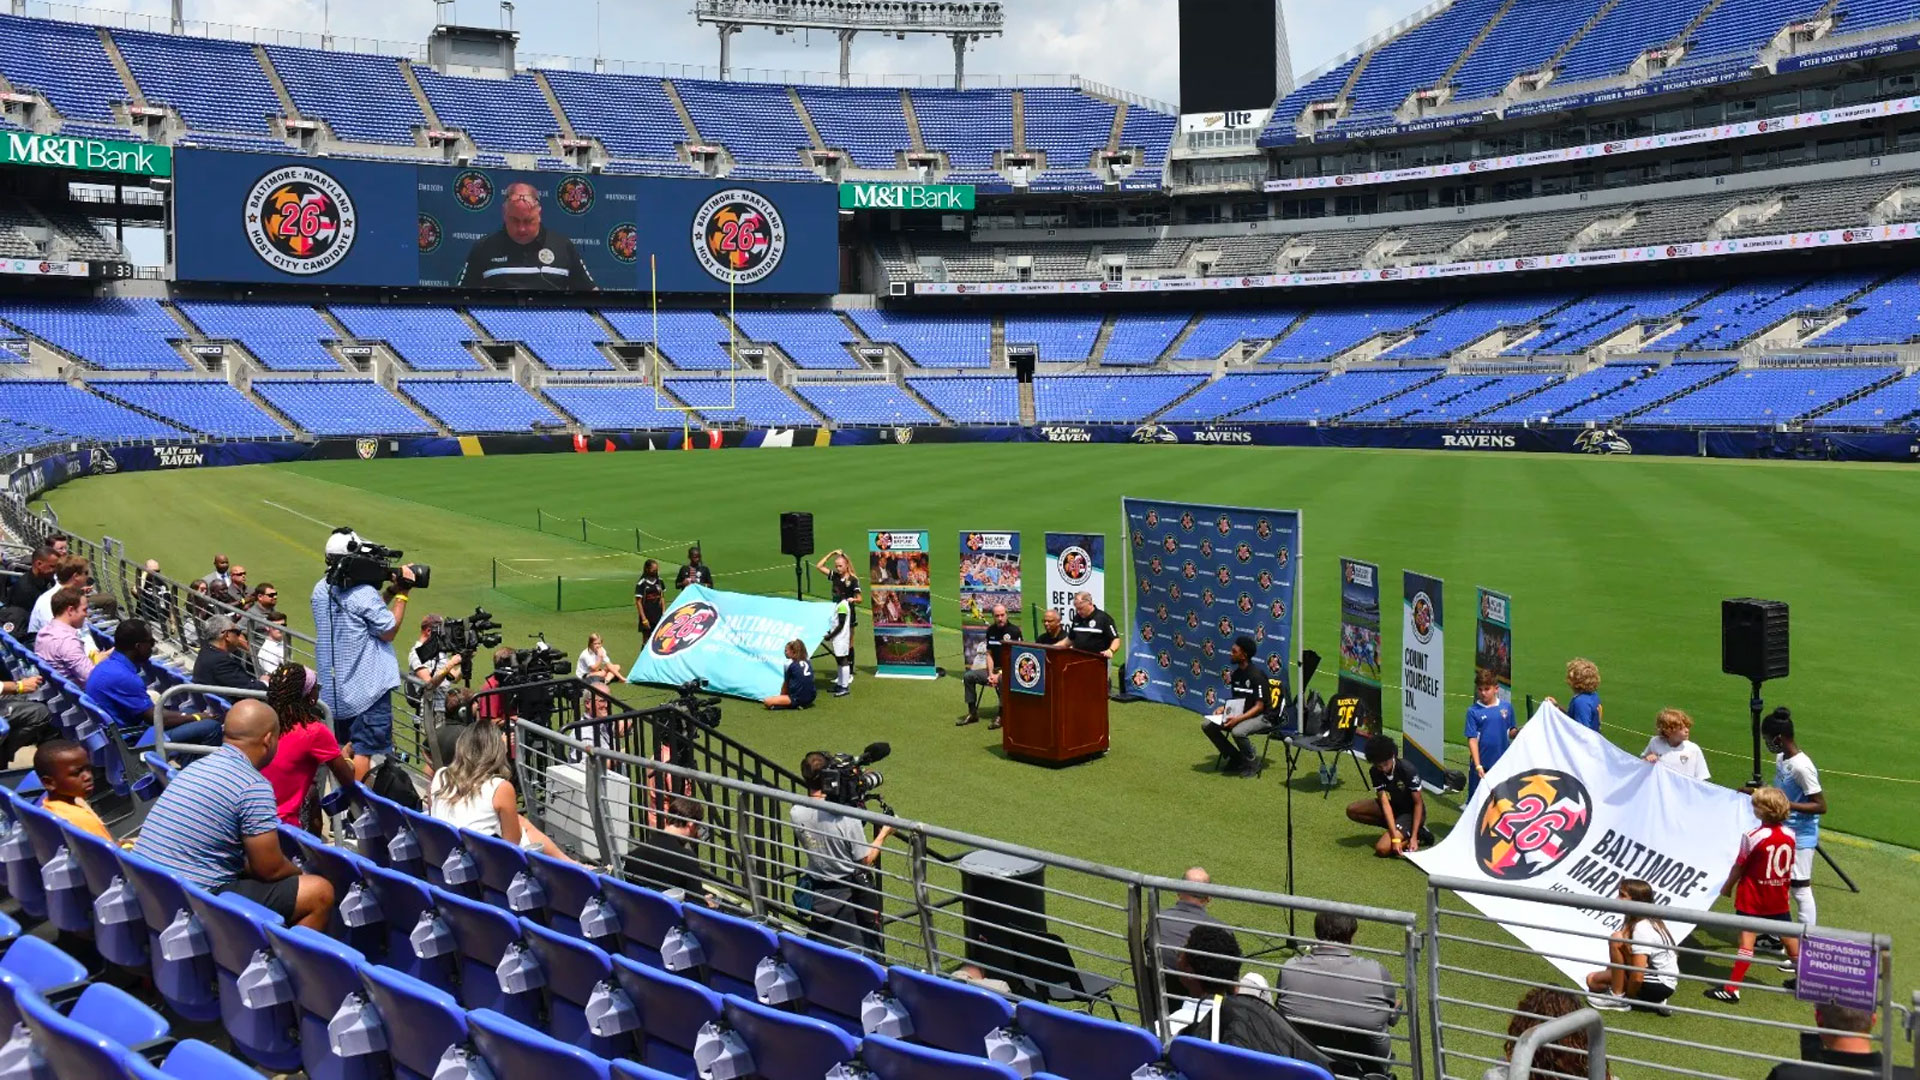 Baltimore welcomes US Soccer and Fifa Delegations to M&T Bank Stadium.